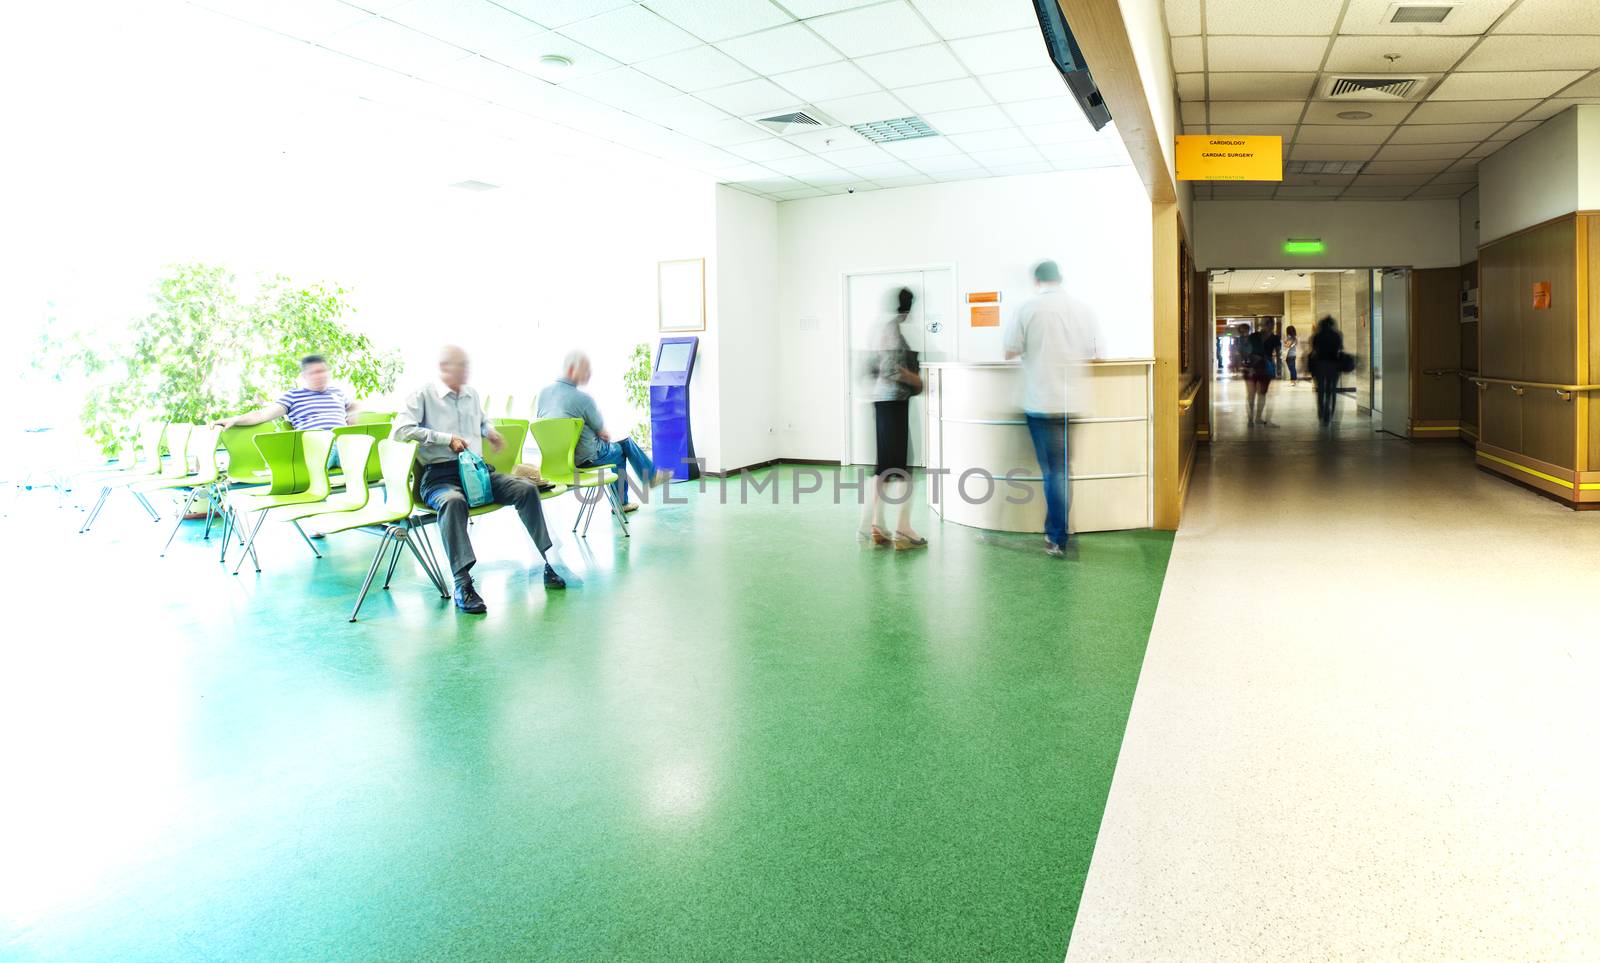 View of the registration desk, waiting area and a corridor in modern hospital with blurred figures of patients and a copy space.